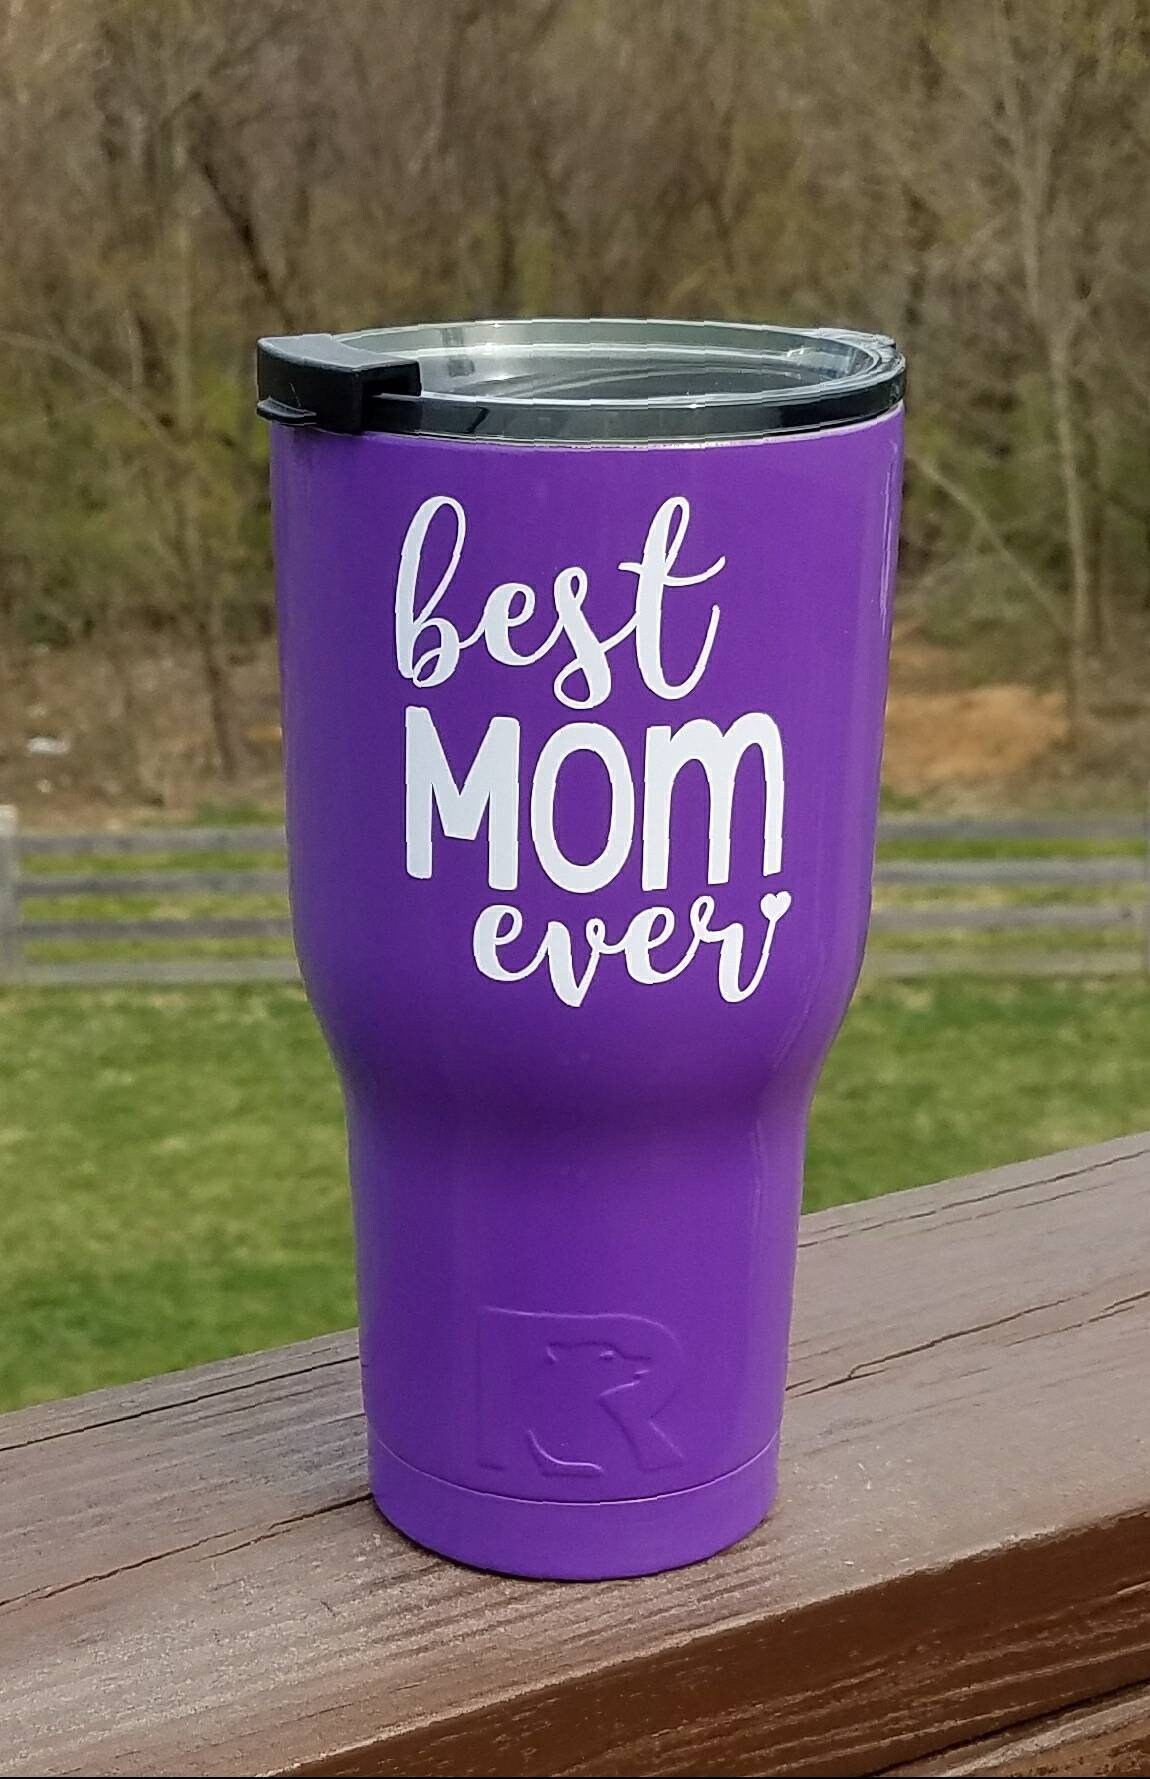 Best Mom Ever Tumbler, Gifts for Mom From Daughter Son, Mothers Day Gifts  for Mom - Birthday Gifts f…See more Best Mom Ever Tumbler, Gifts for Mom